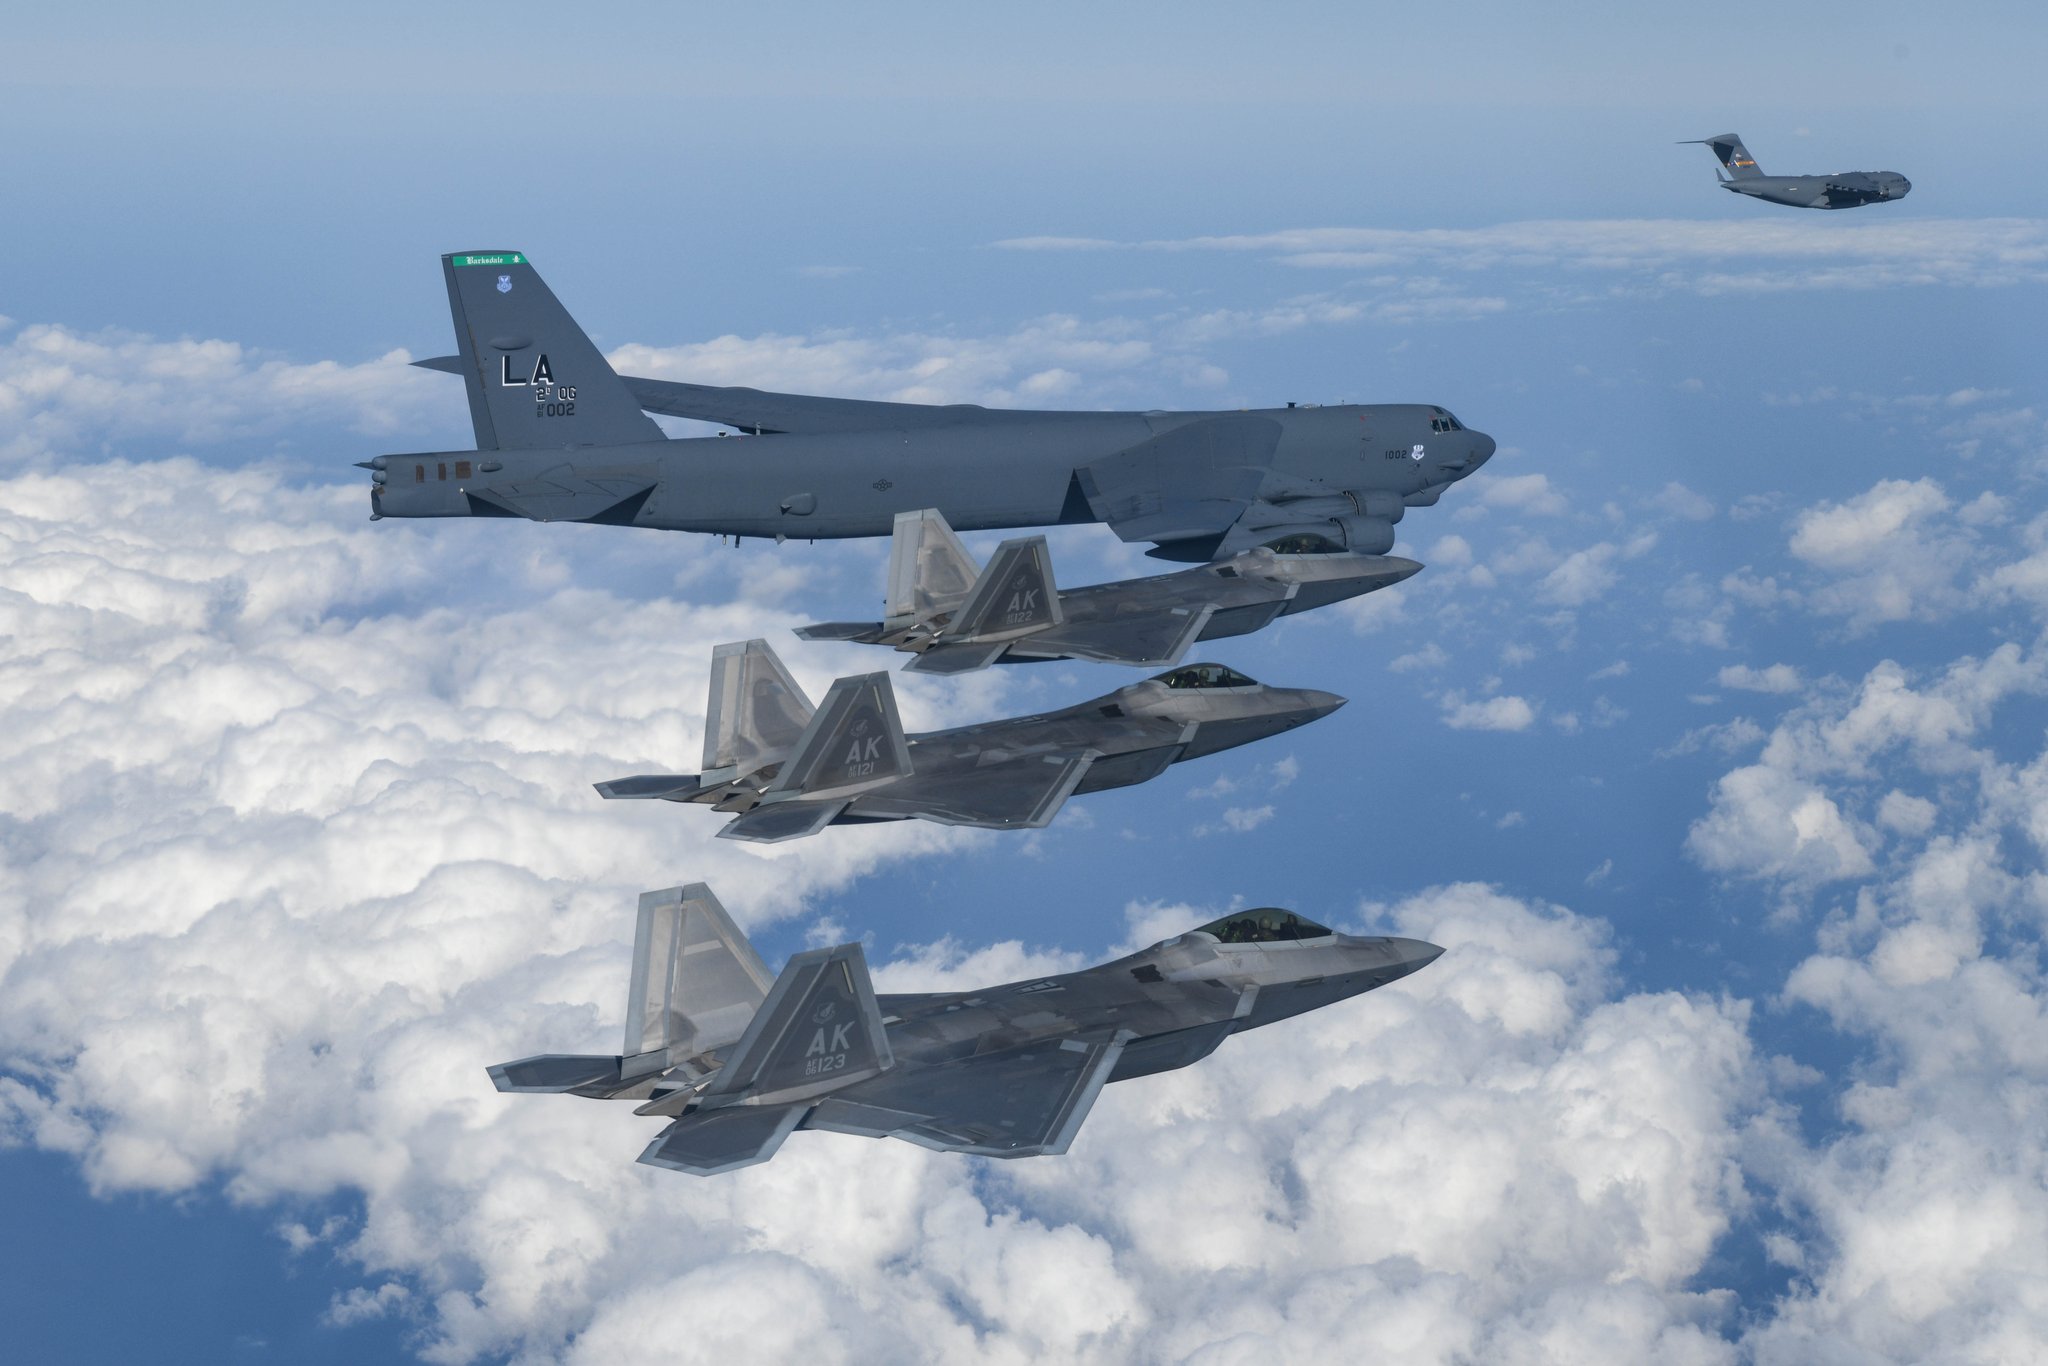 The US is sending B-52 bombers and F-22 fighter jets for joint exercises with South Korea